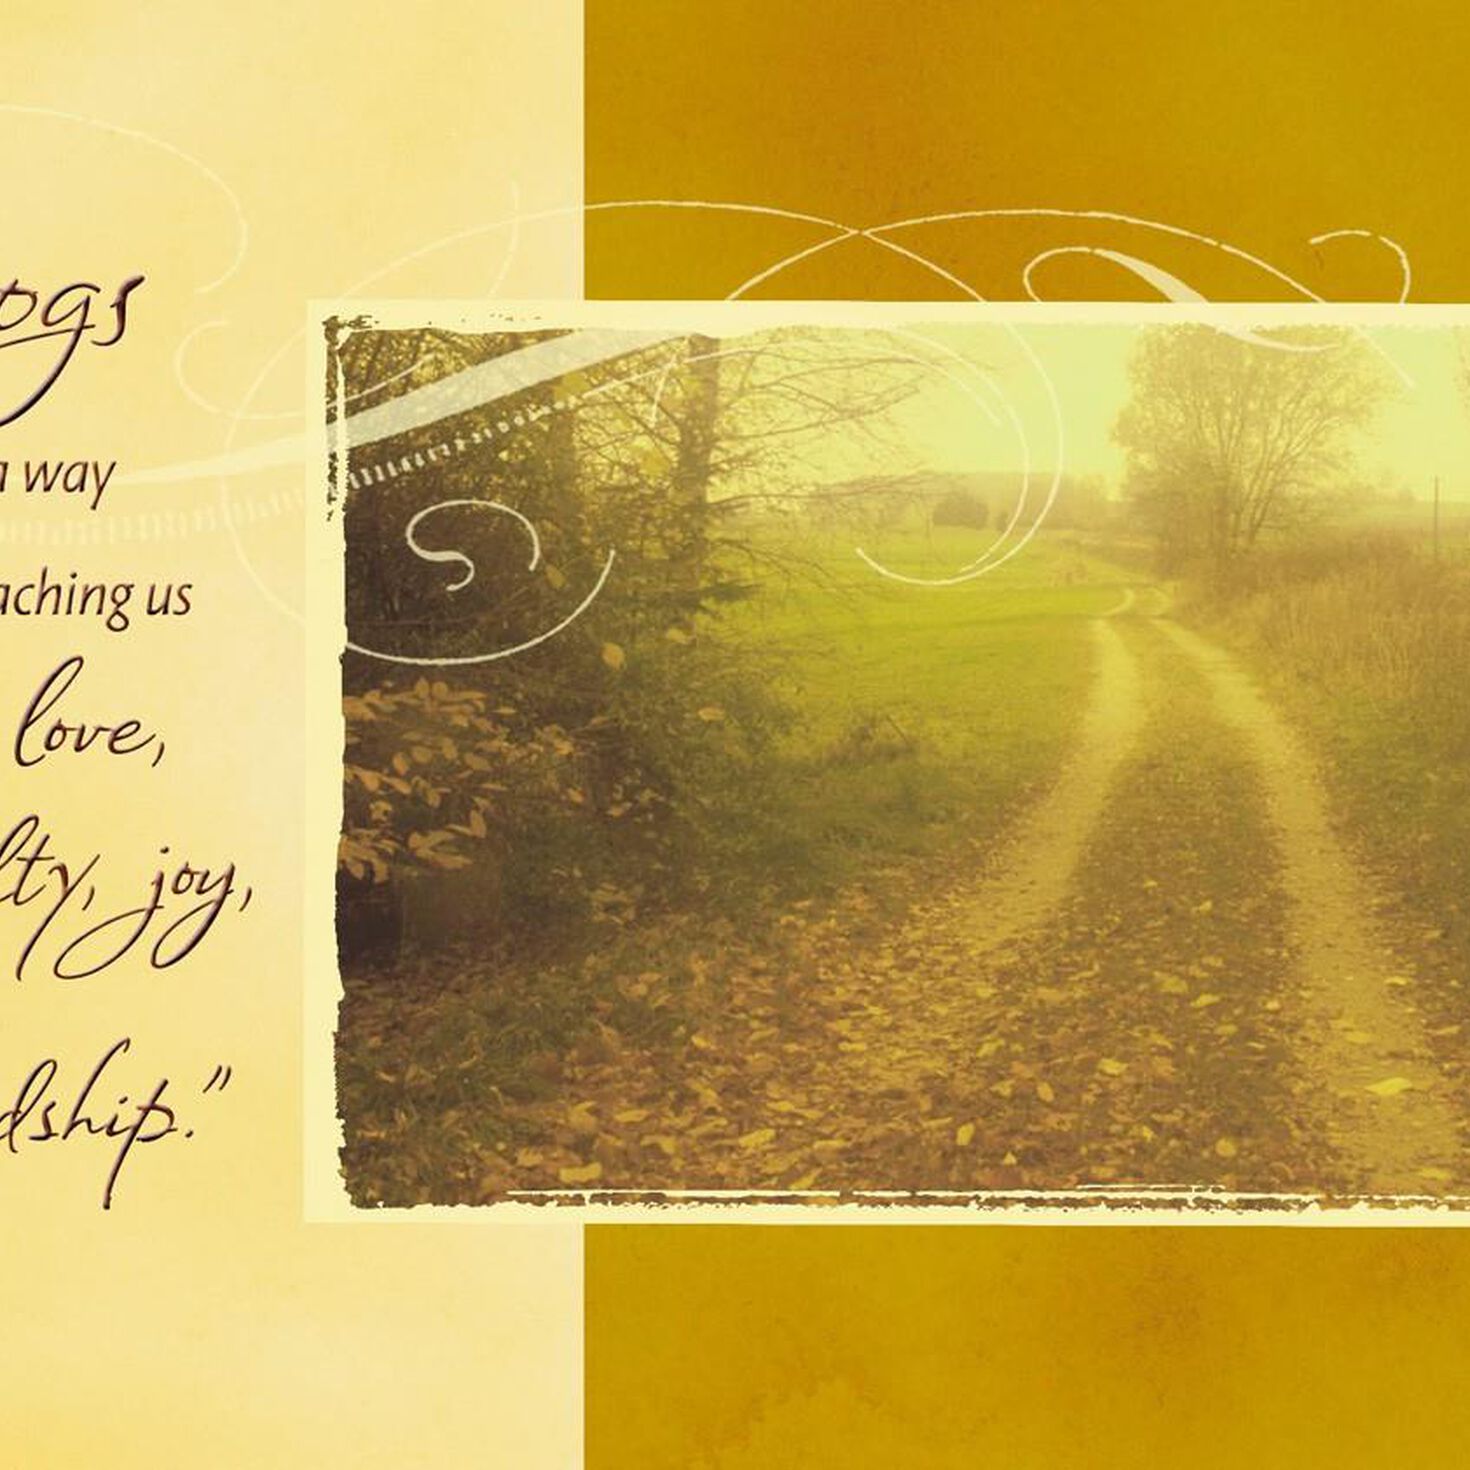 Dirt Road By Field Loss of Pet Sympathy Card Greeting